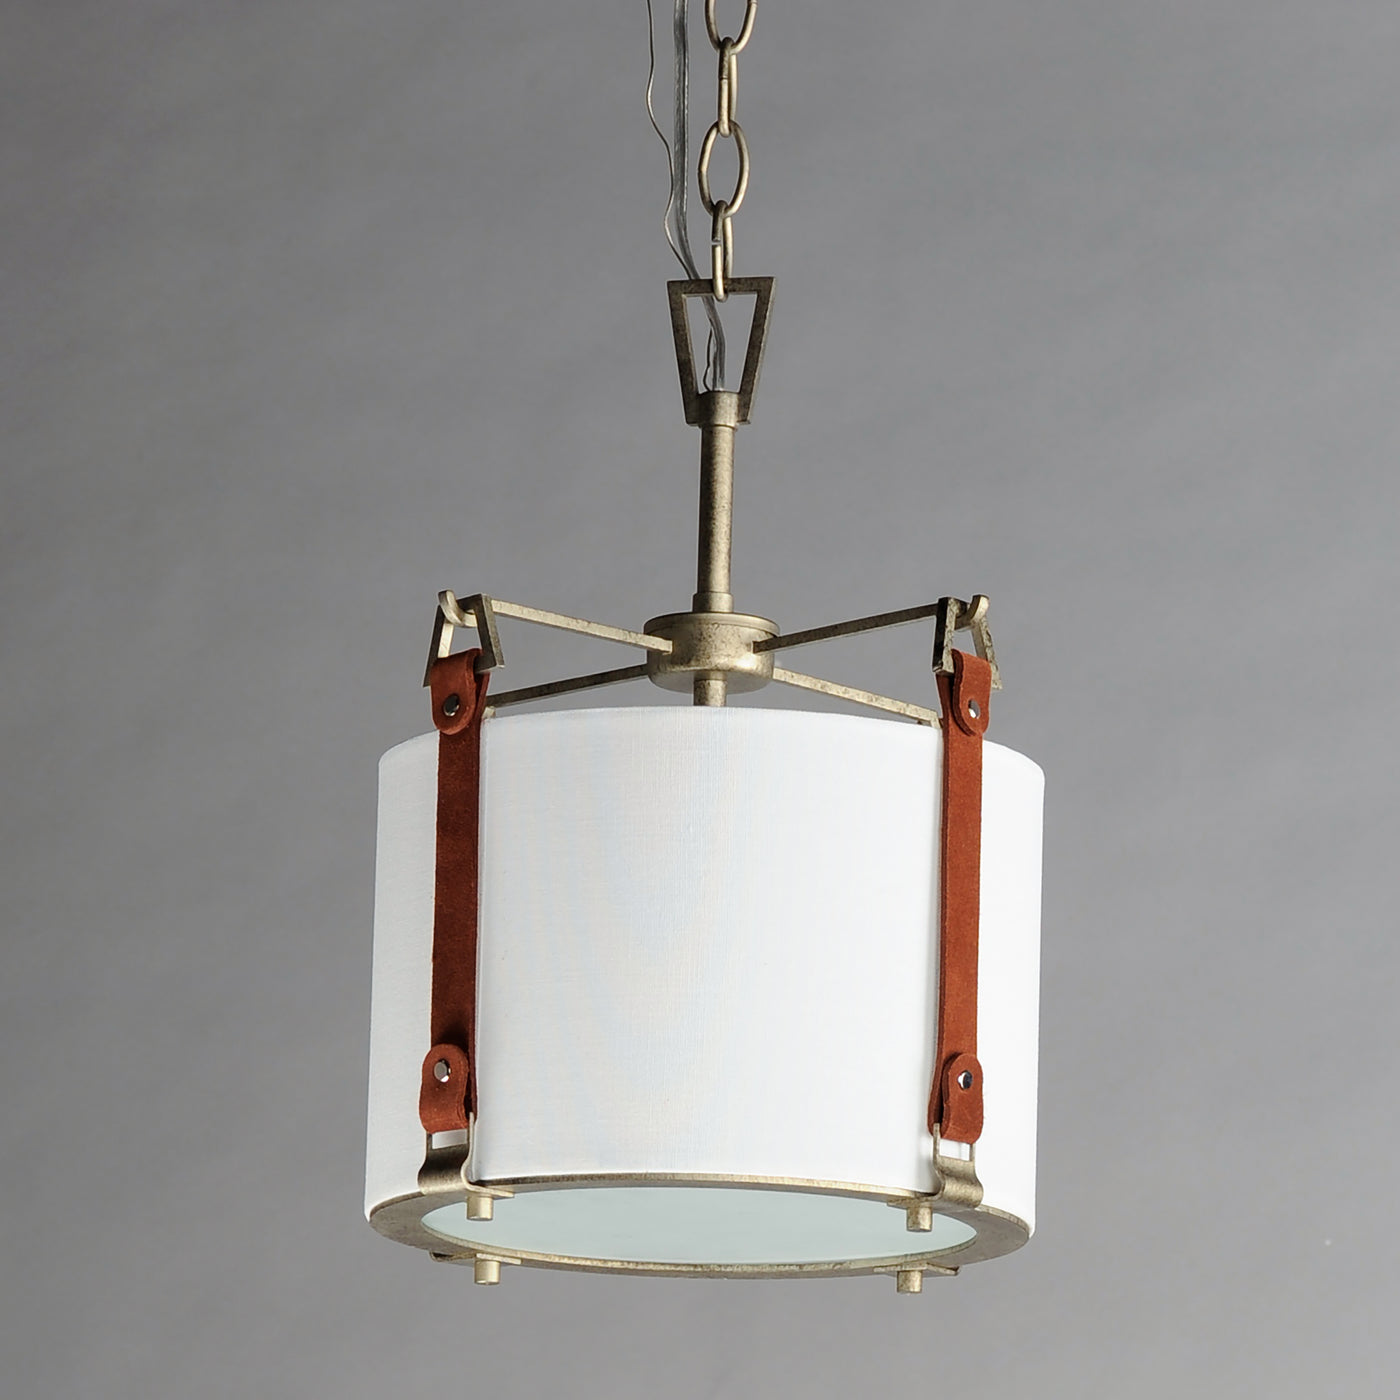 Weathered Zinc Frame and Brown Suede Strap with Linen Shade Pendant